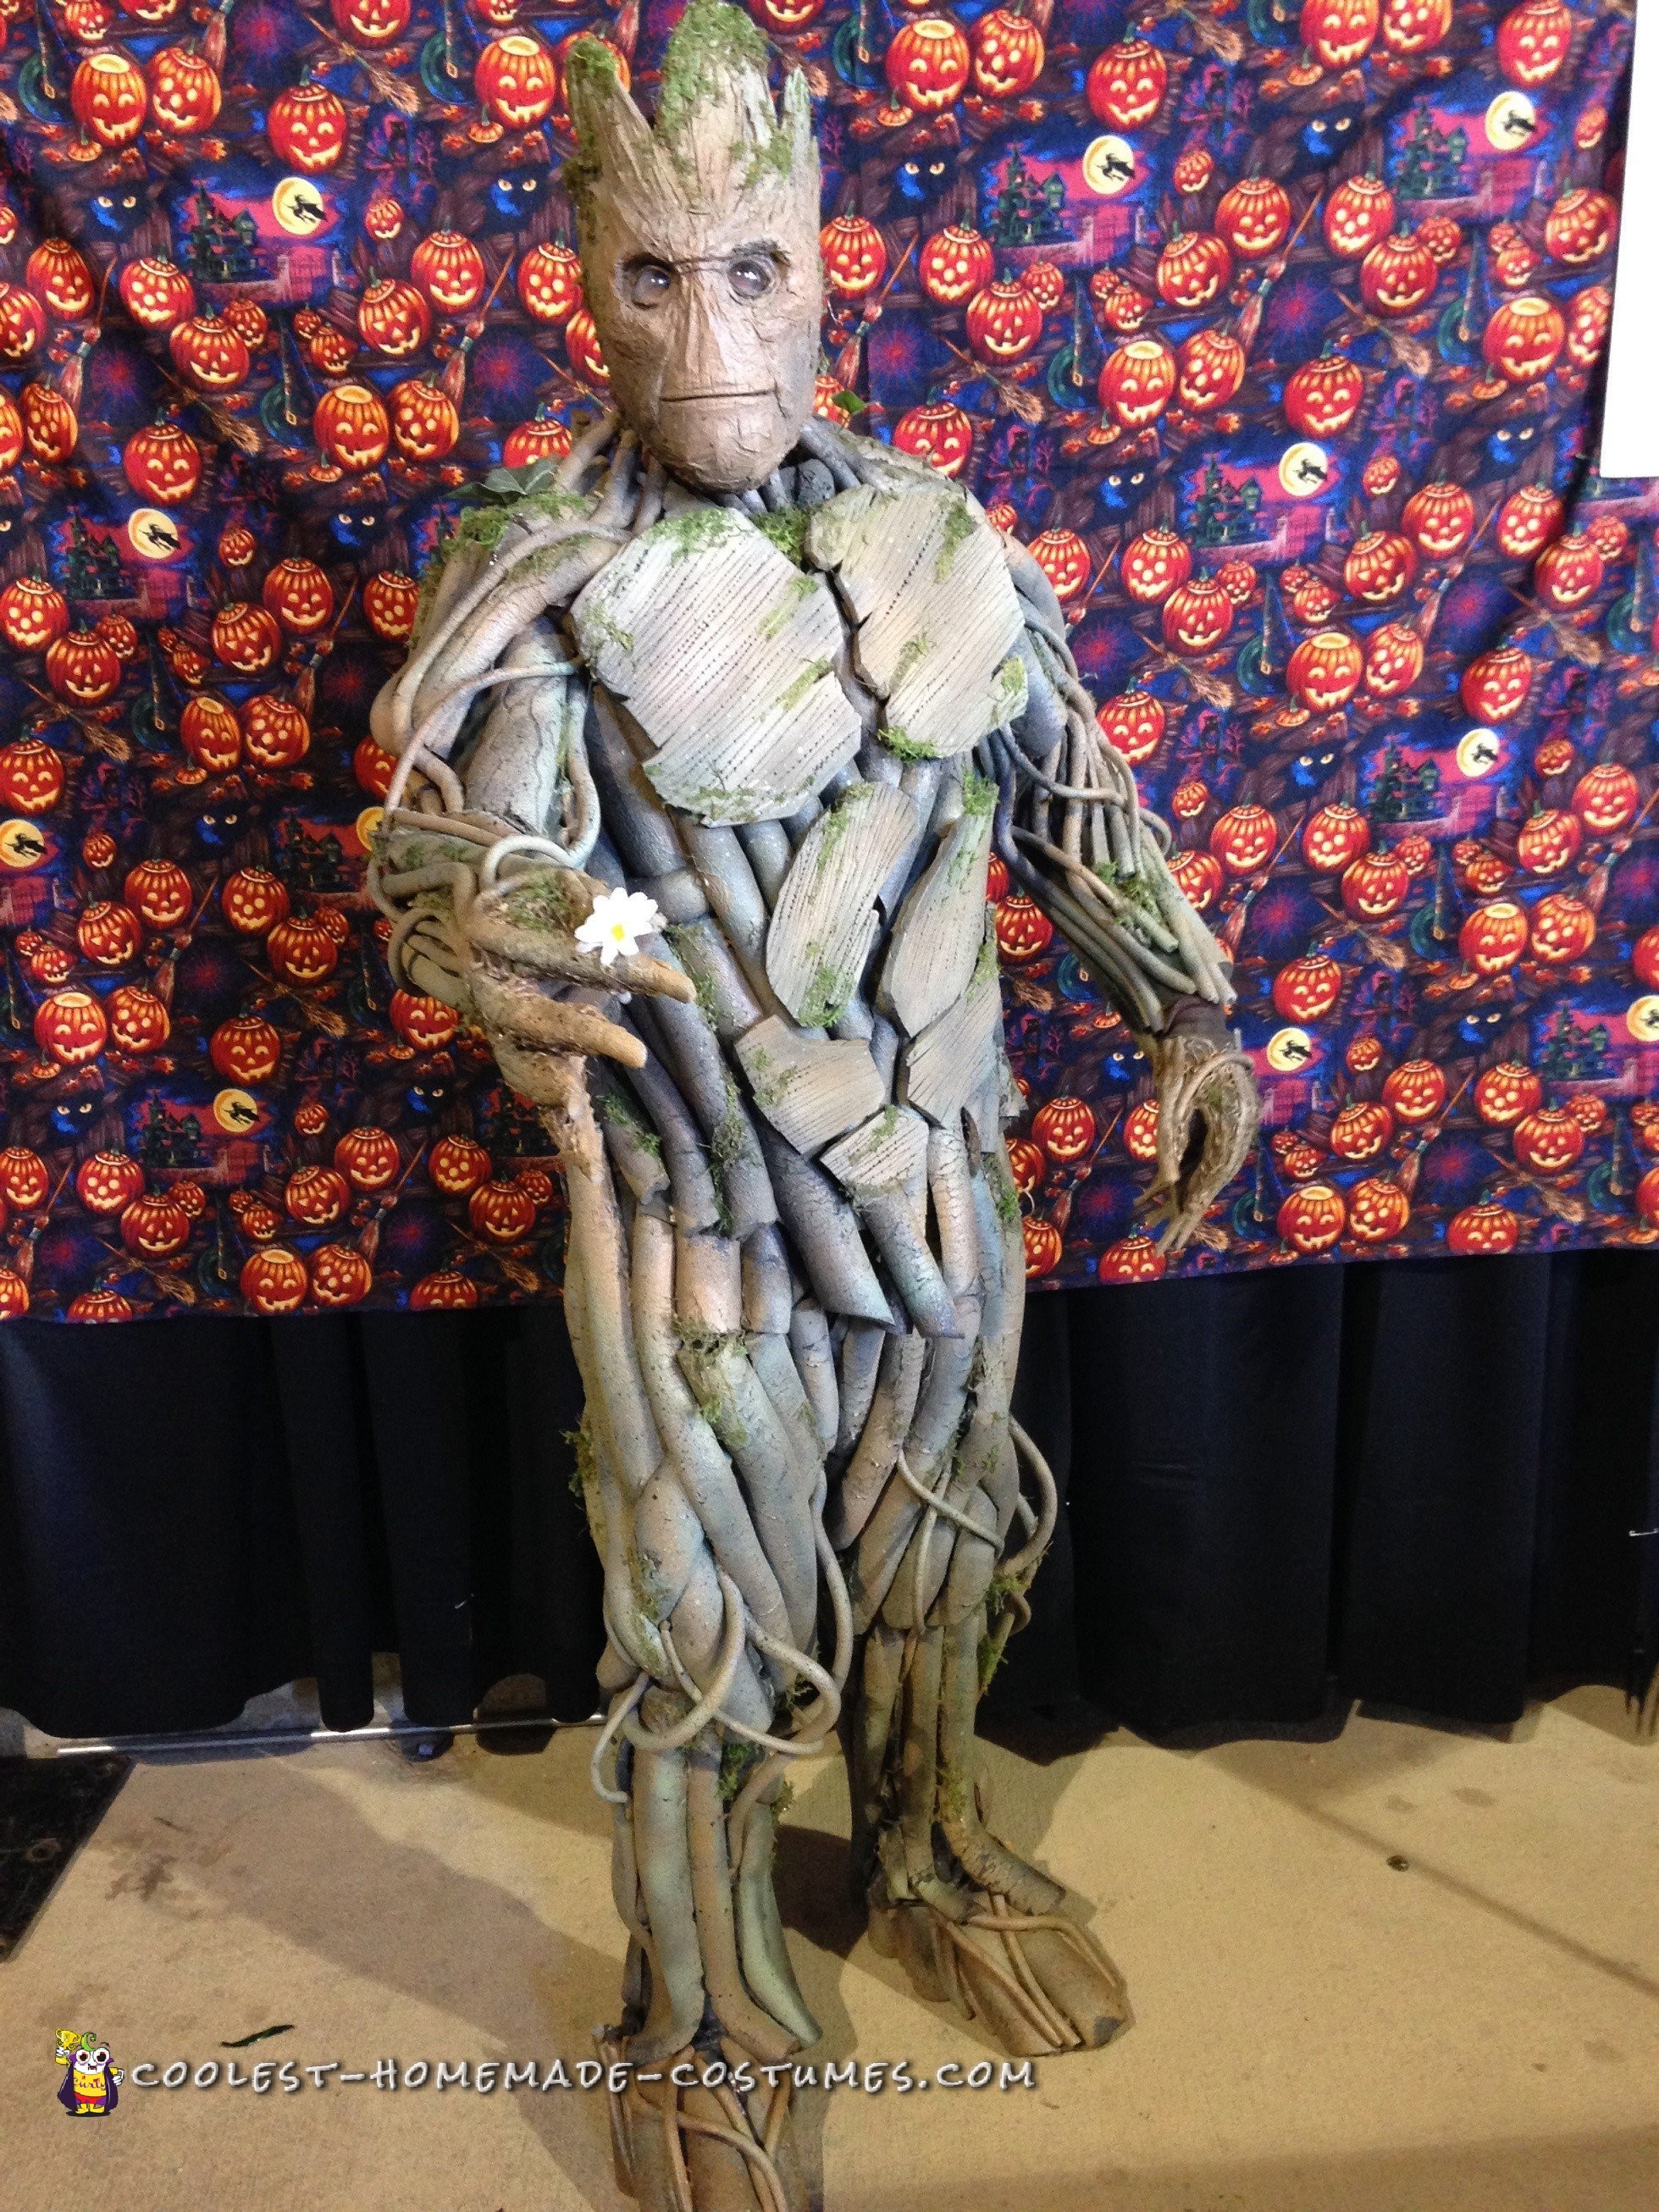 Coolest Ever 100% Homemade Groot Costume!